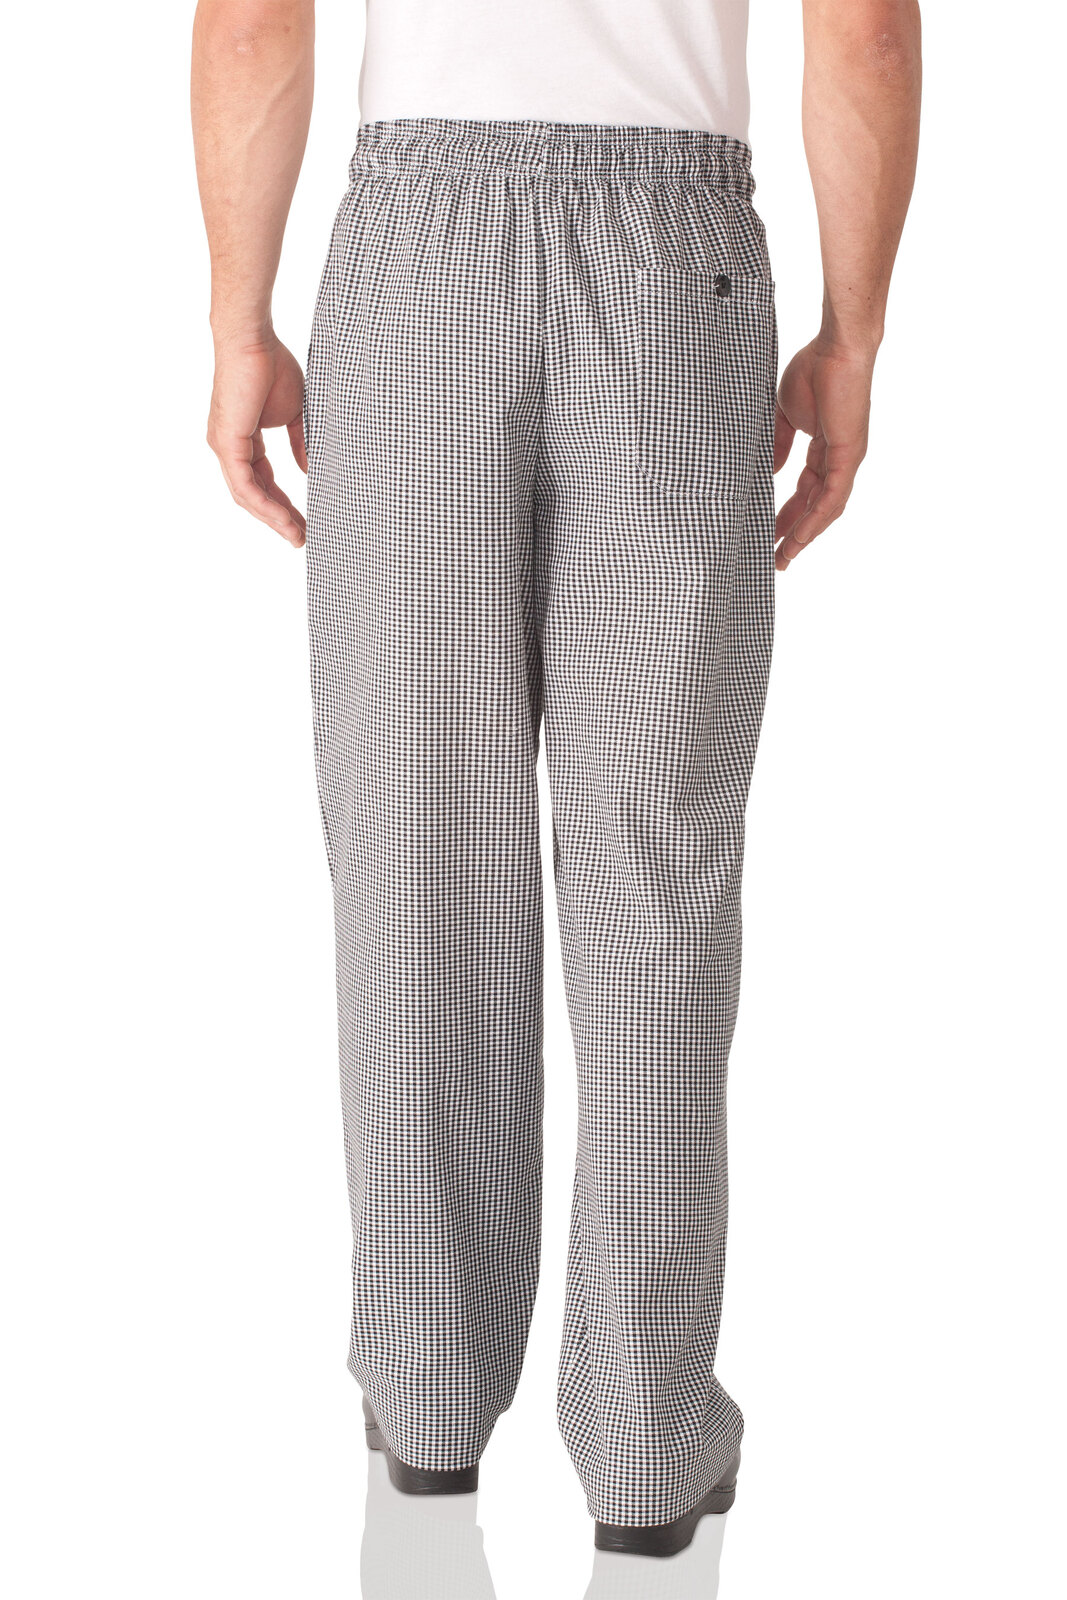 Chef Works Small Check Baggy Pants w/ Zipper Fly